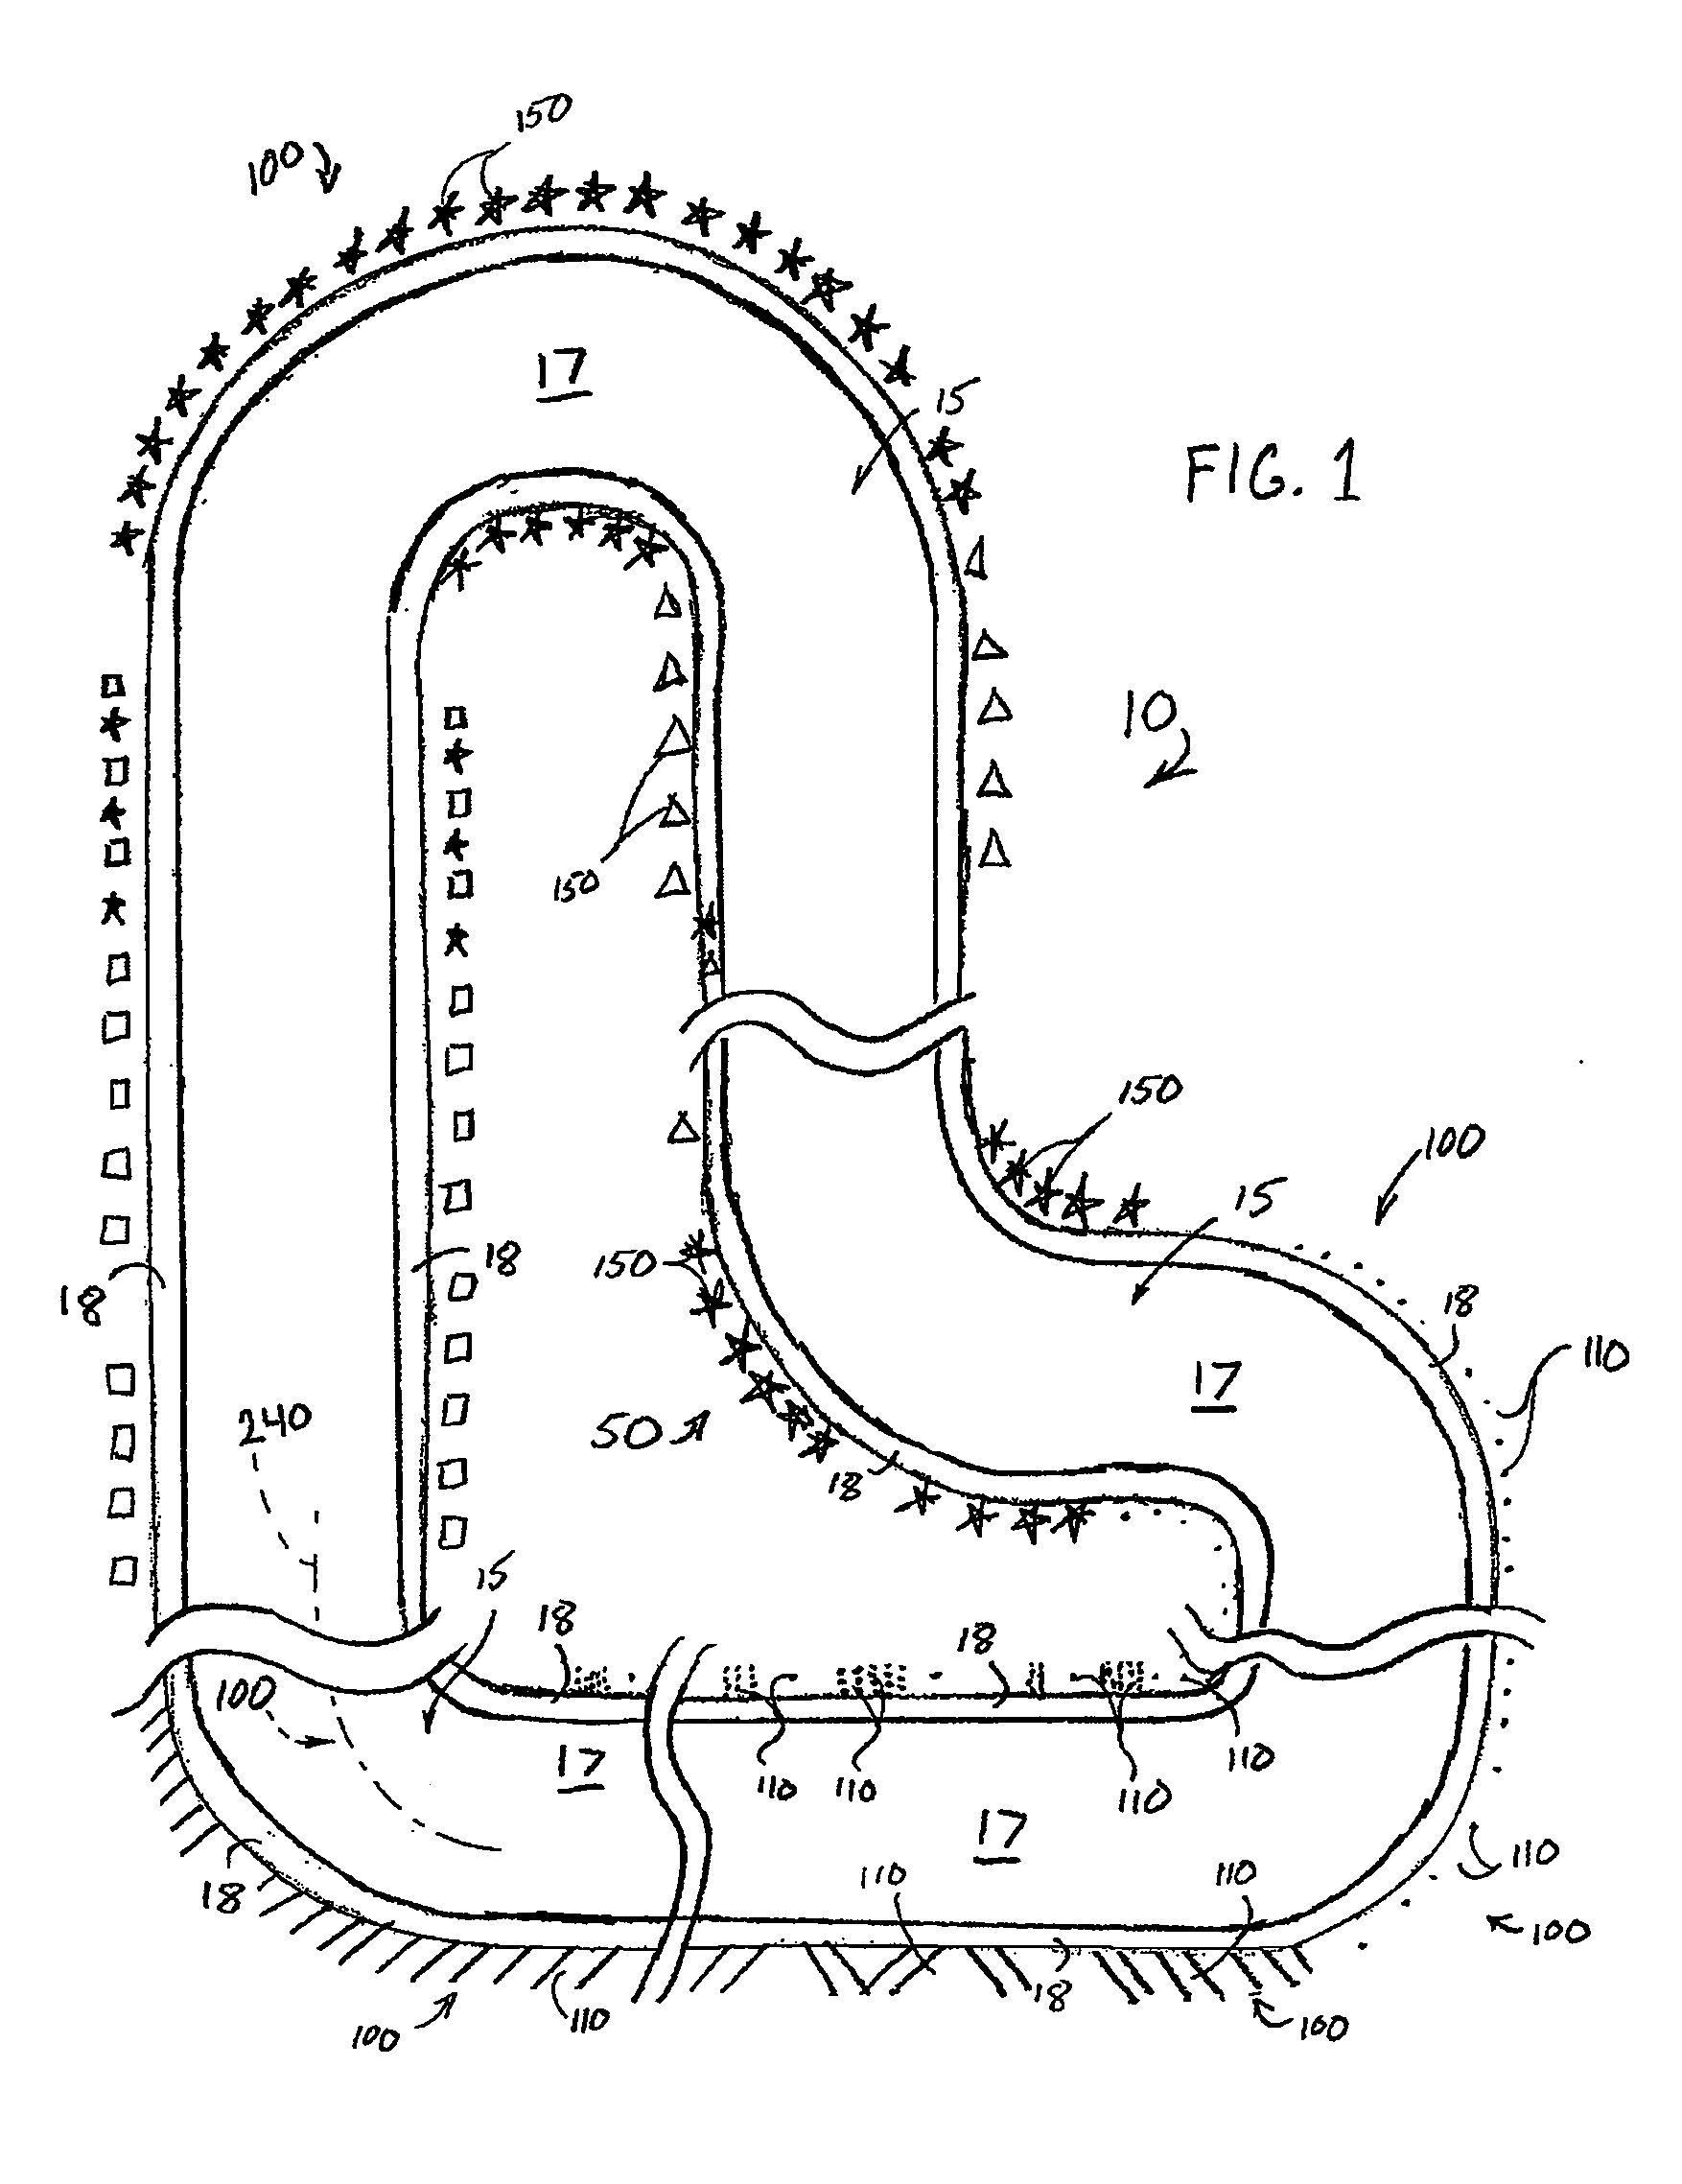 Road Course and Methods of Use